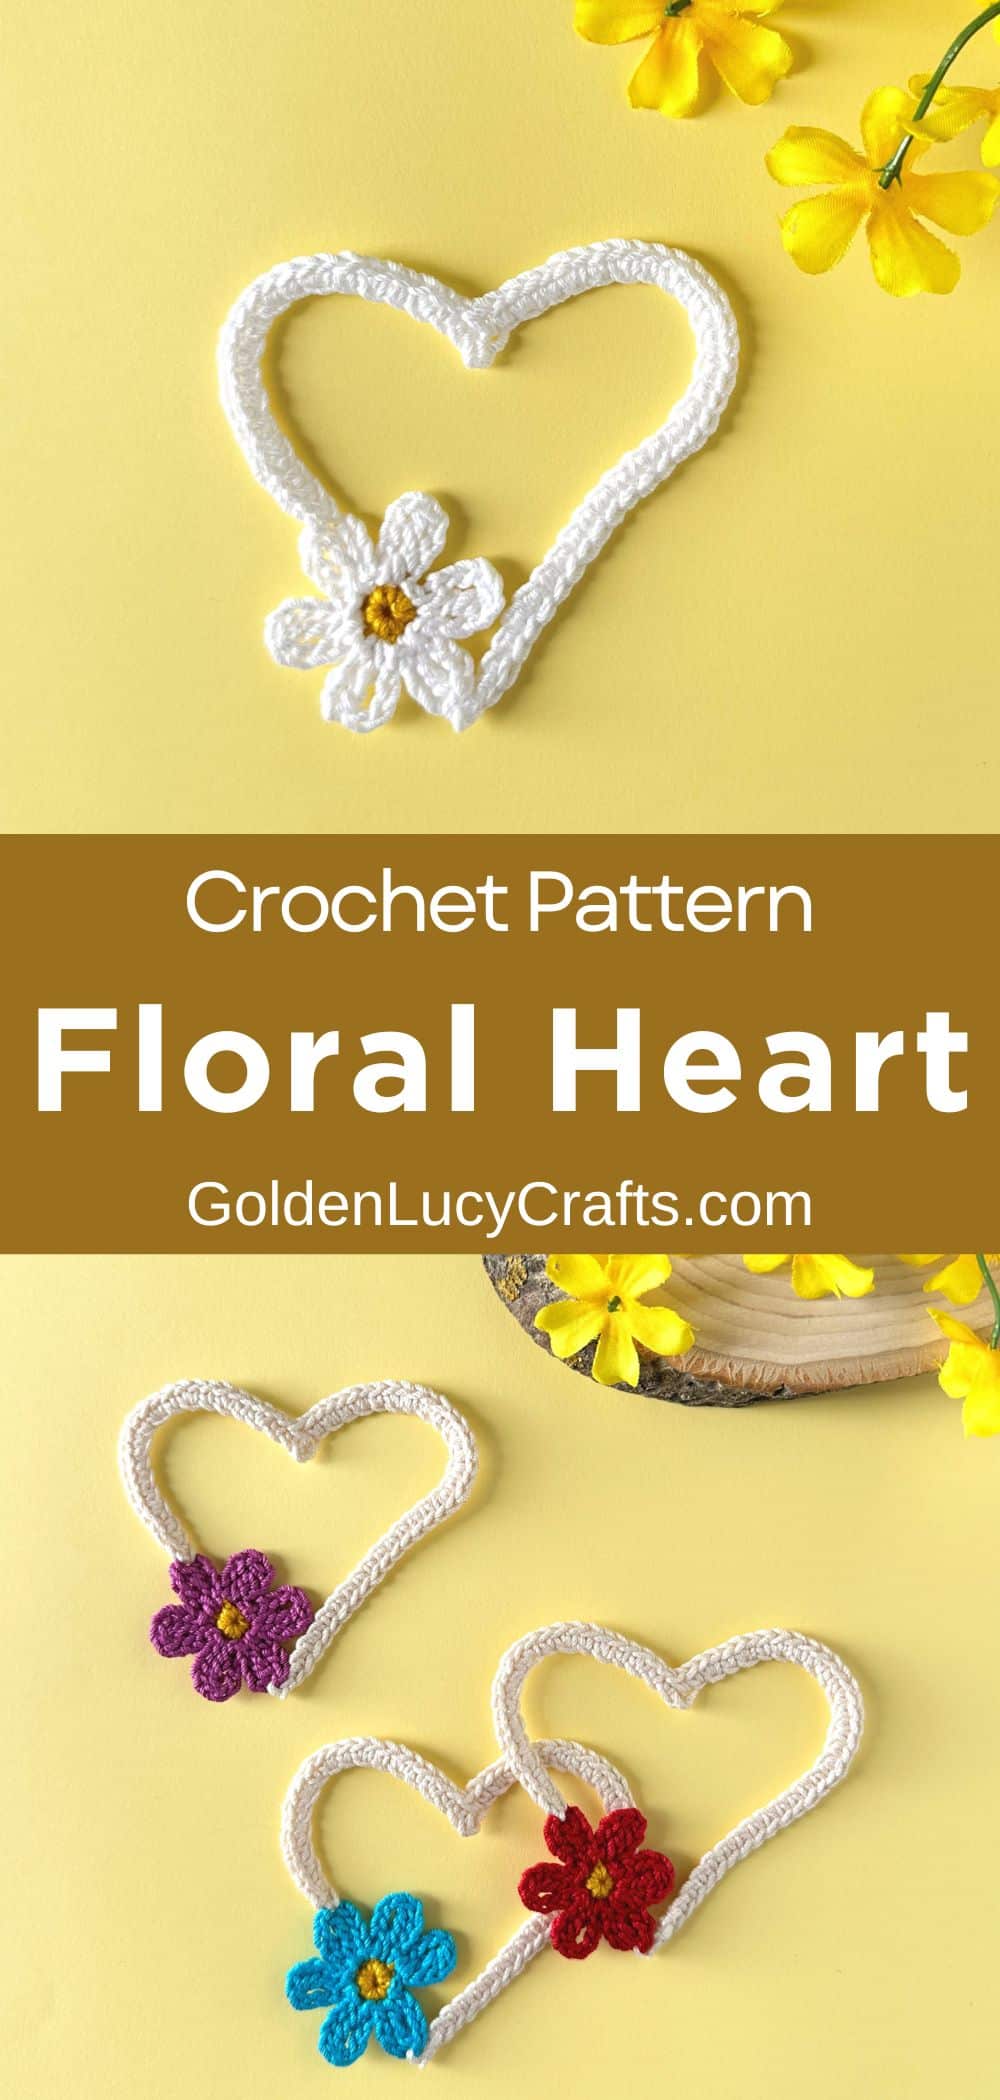 Crochet floral hearts on a yellow background.